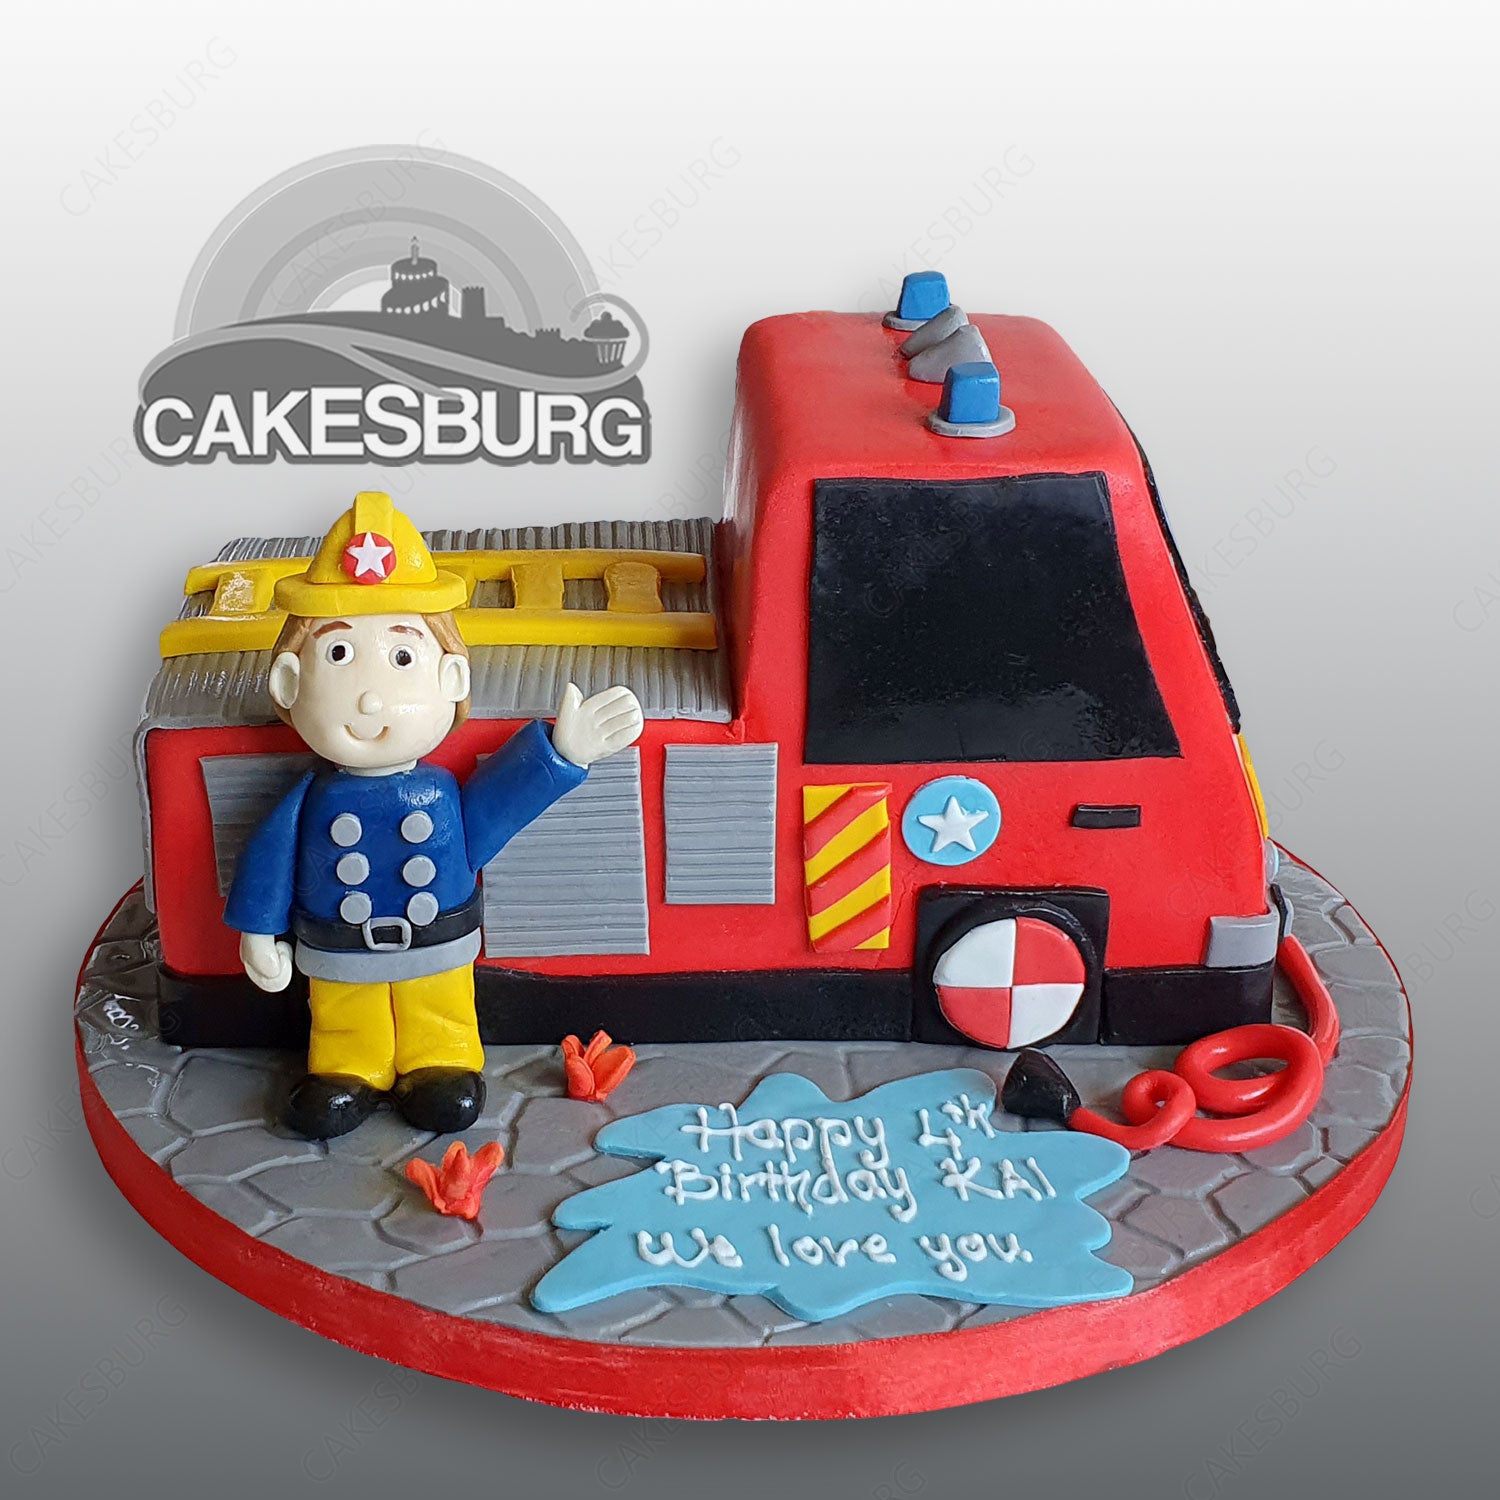 Fire Truck Cake HOW TO COOK THAT Fire Engine Birthday Cake - YouTube